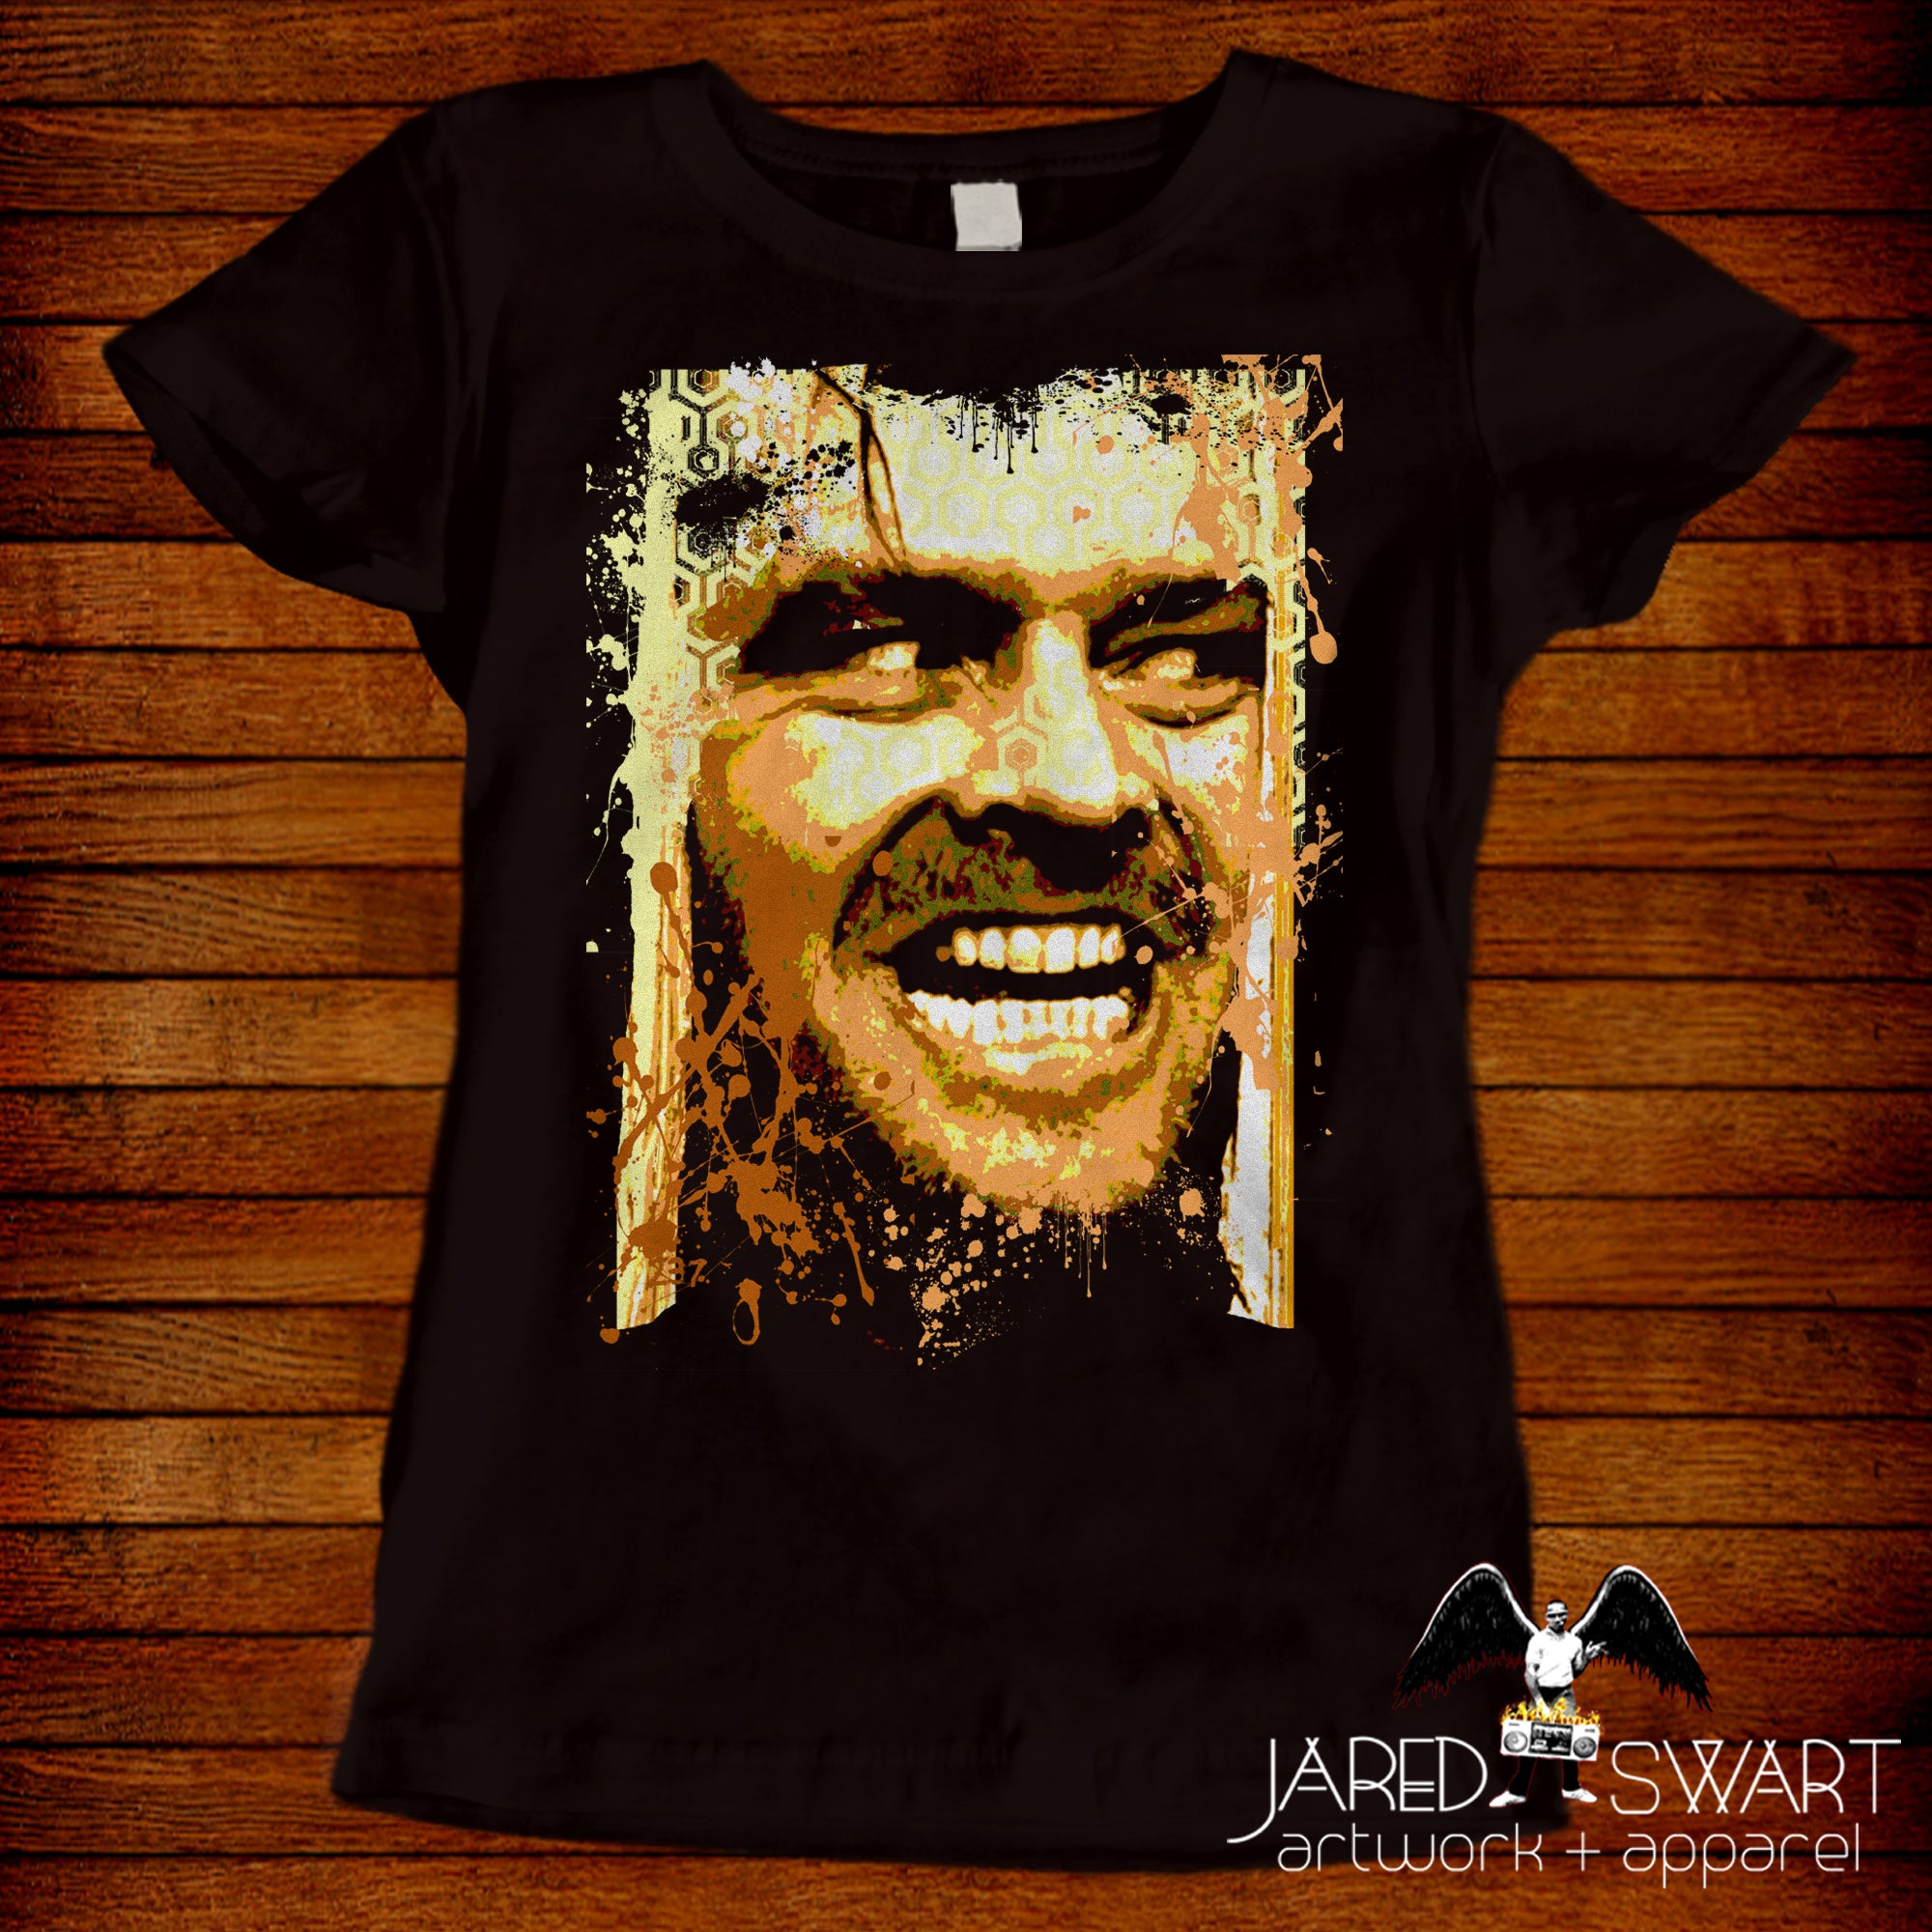 The Shining T-shirt fine art painting styled design